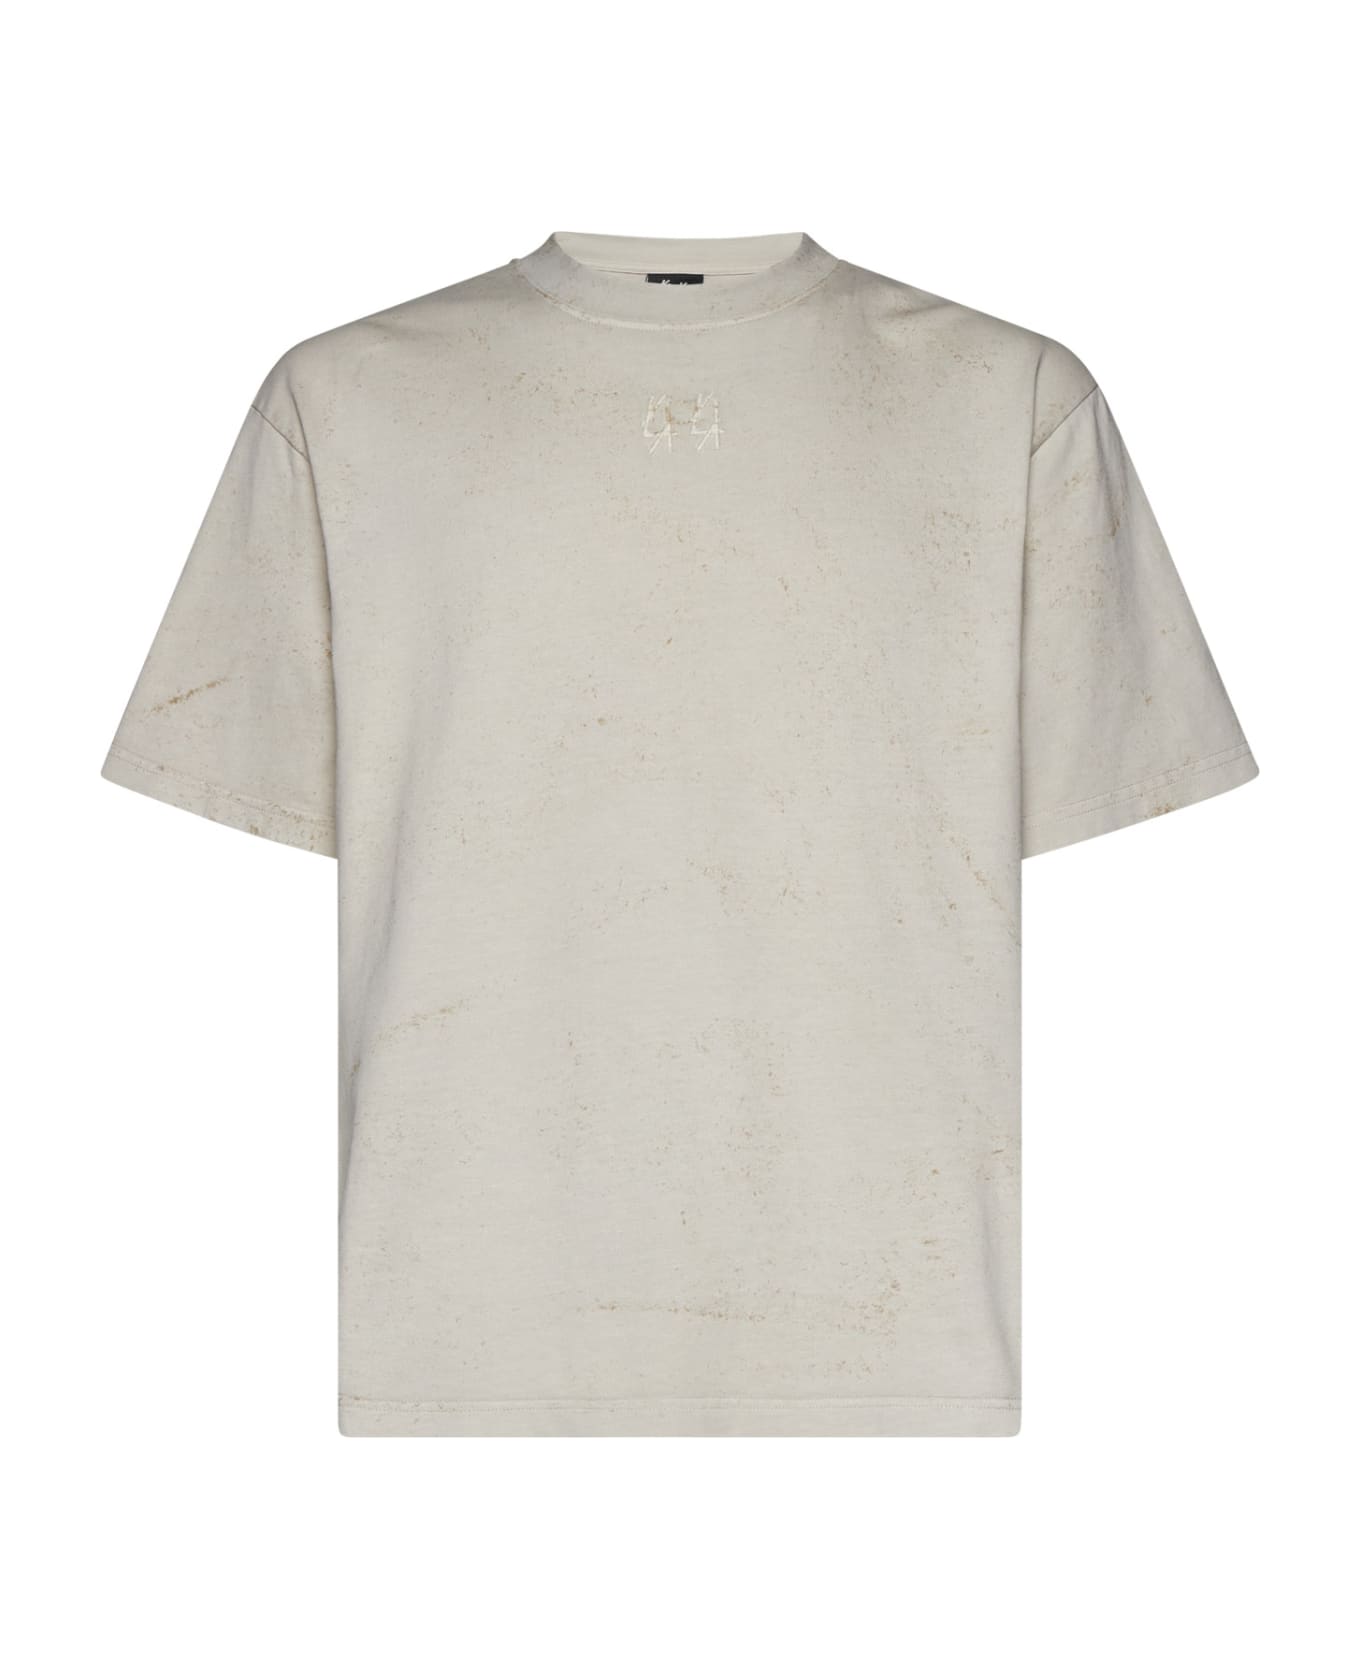 44 Label Group T-Shirt - Dirty white+gyps シャツ